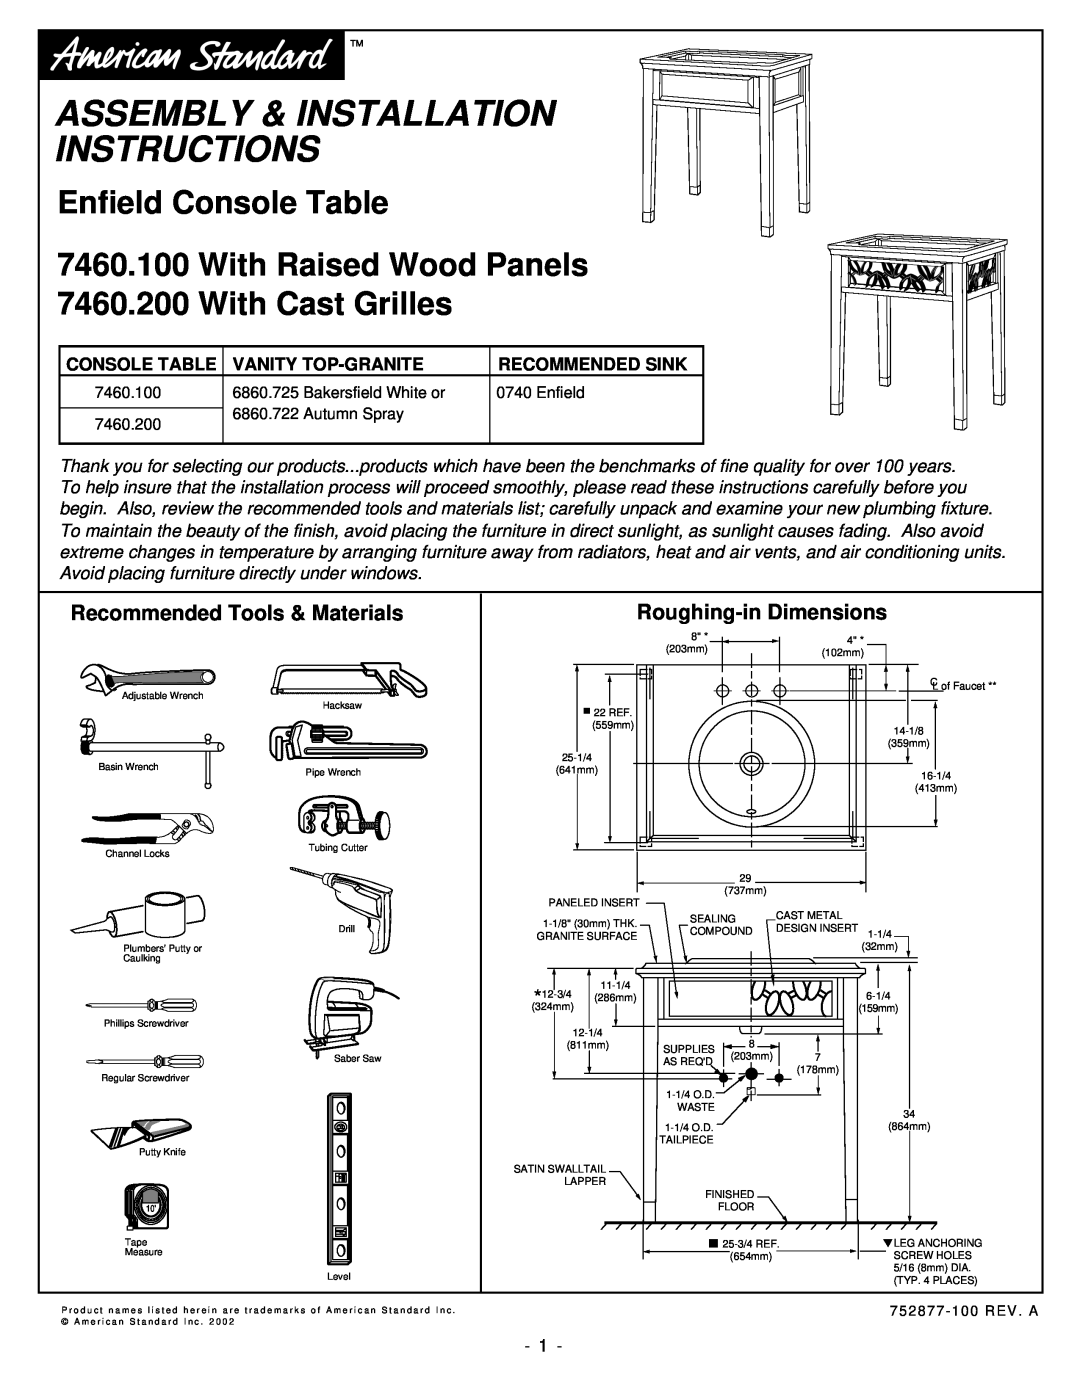 American Standard 7460.200 installation instructions Recommended Tools & Materials, Roughing-inDimensions, Console Table 